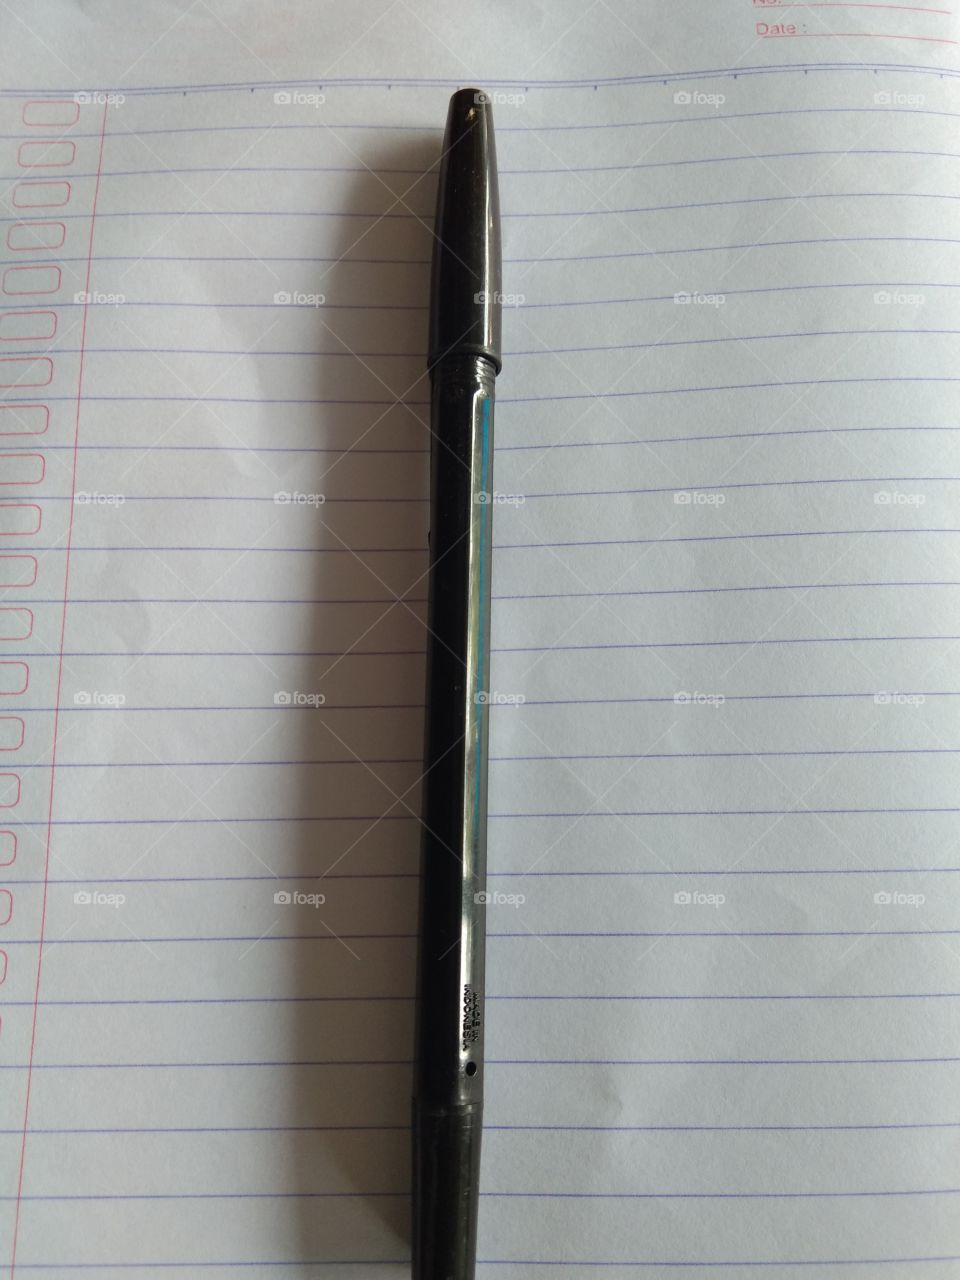 black pens above the striped book